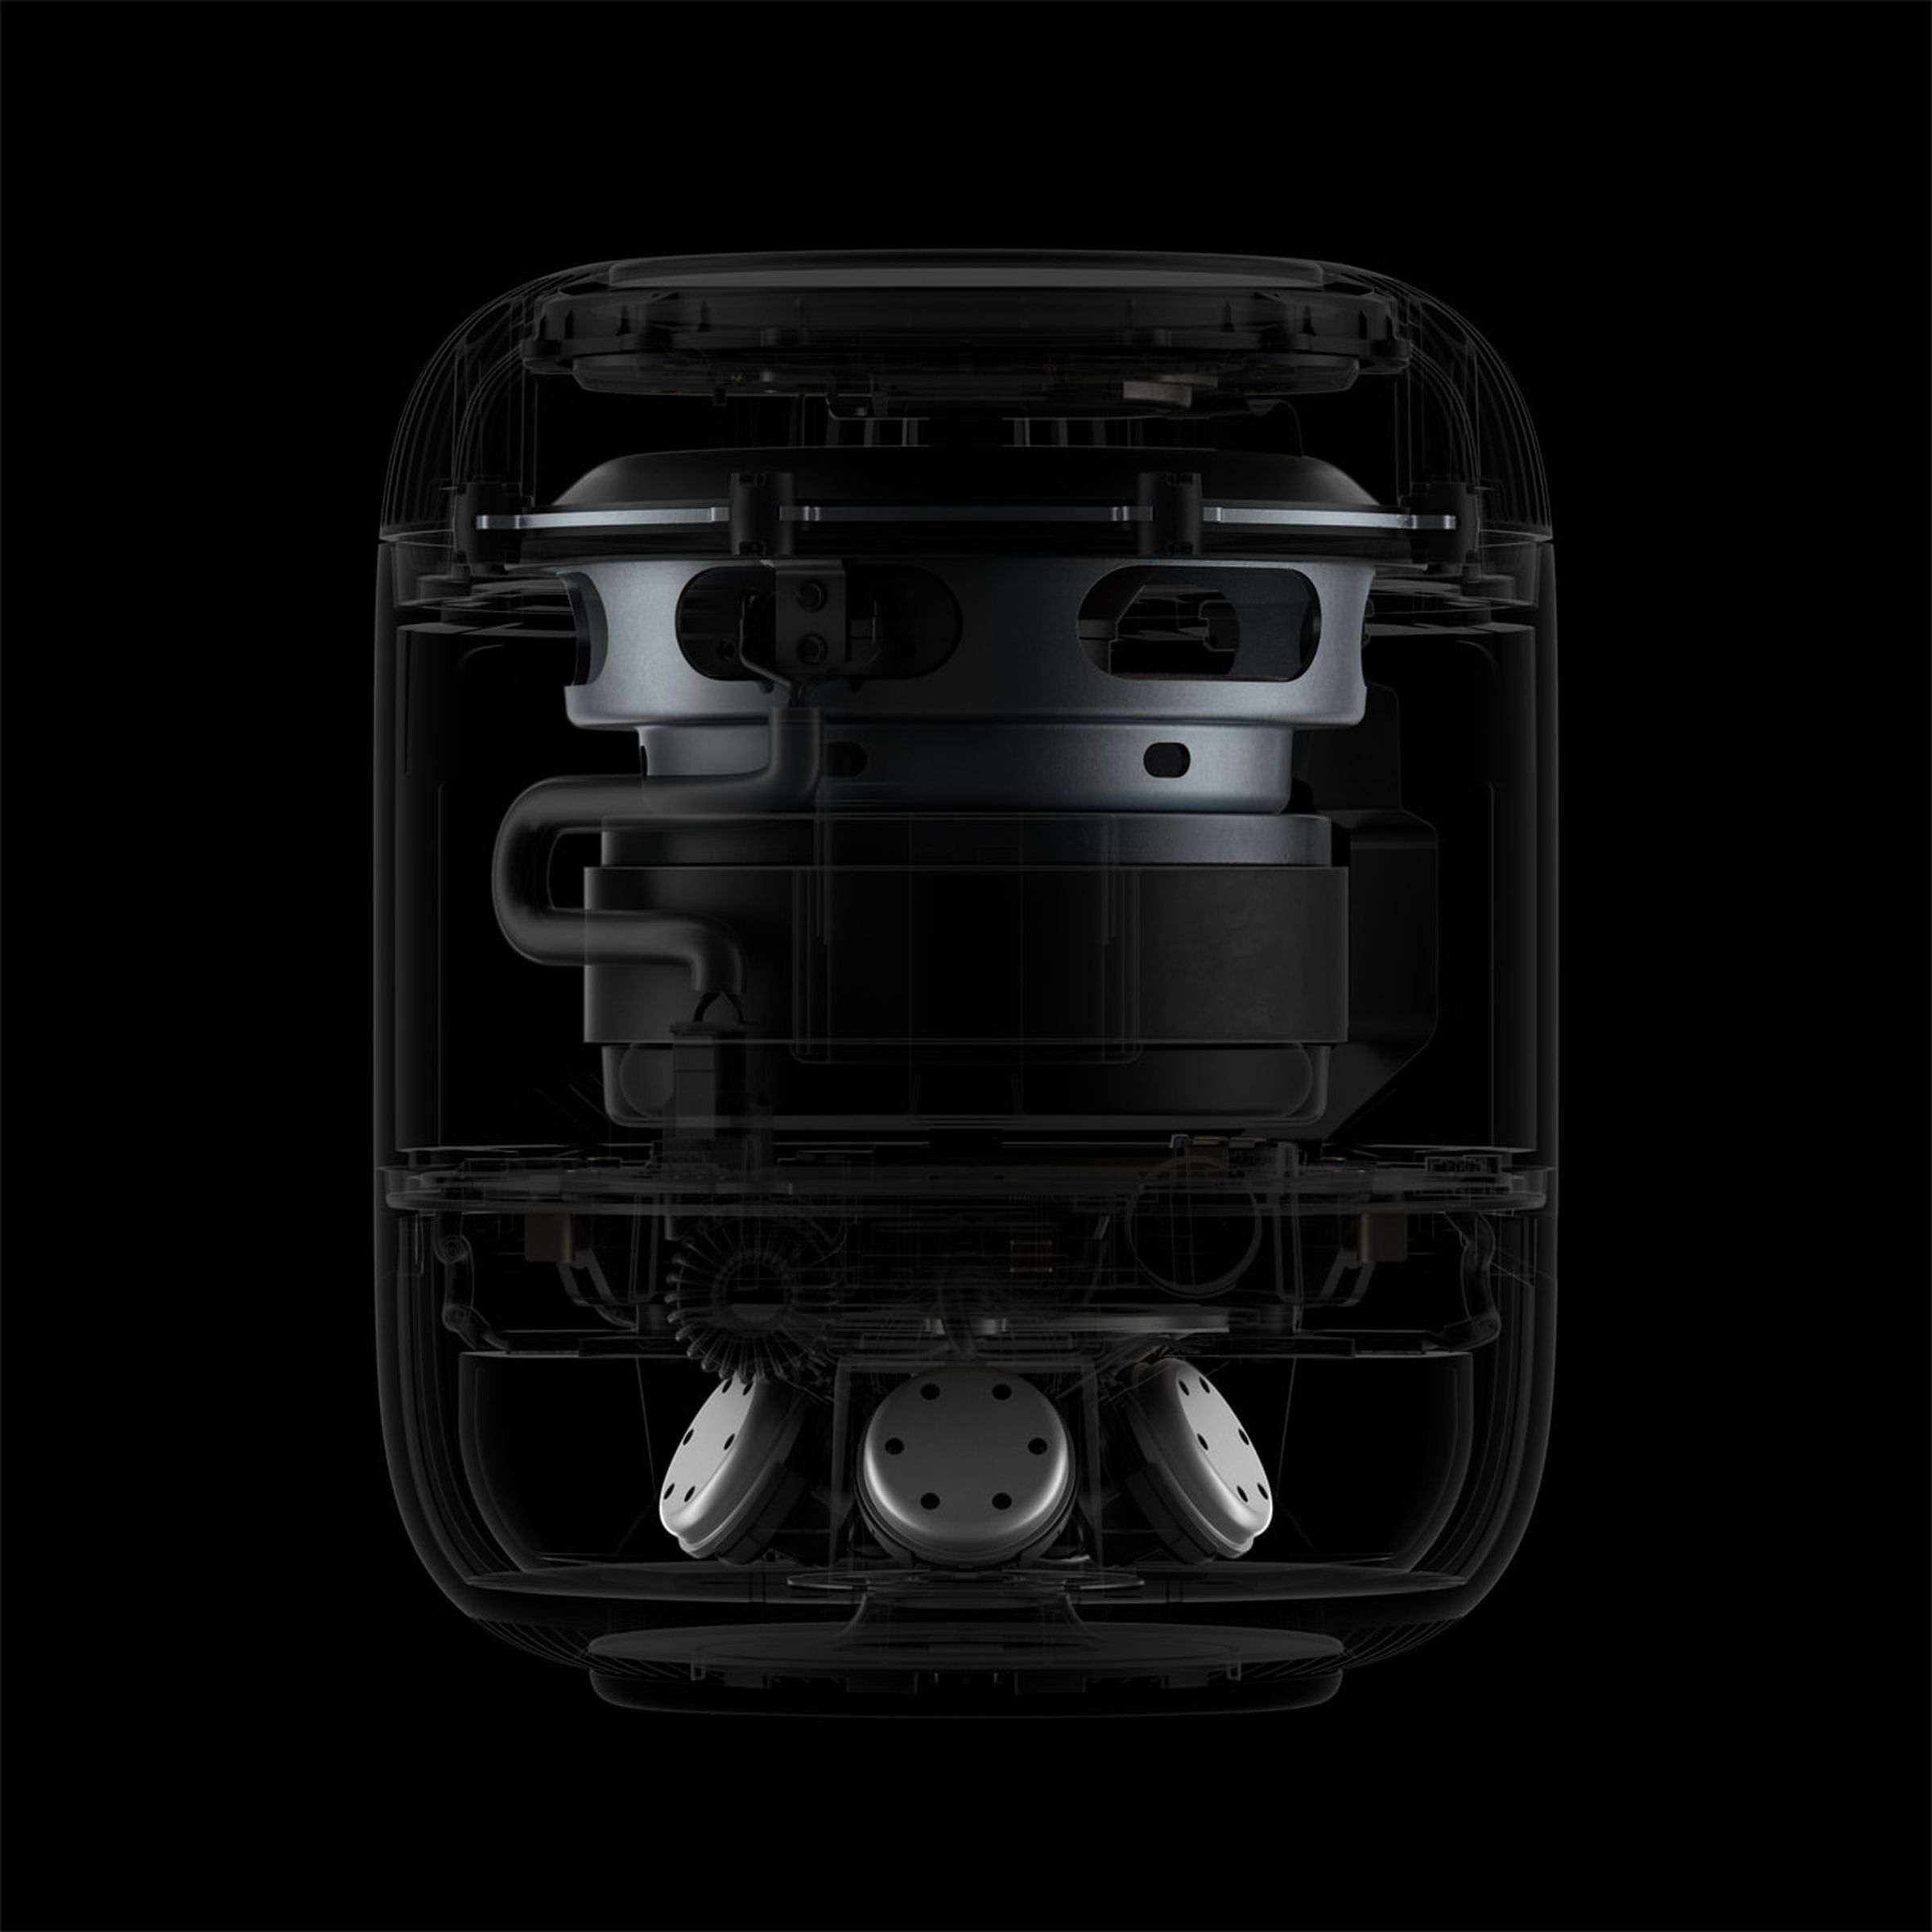 An image displaying the internal components of Apple's second-gen HomePod.